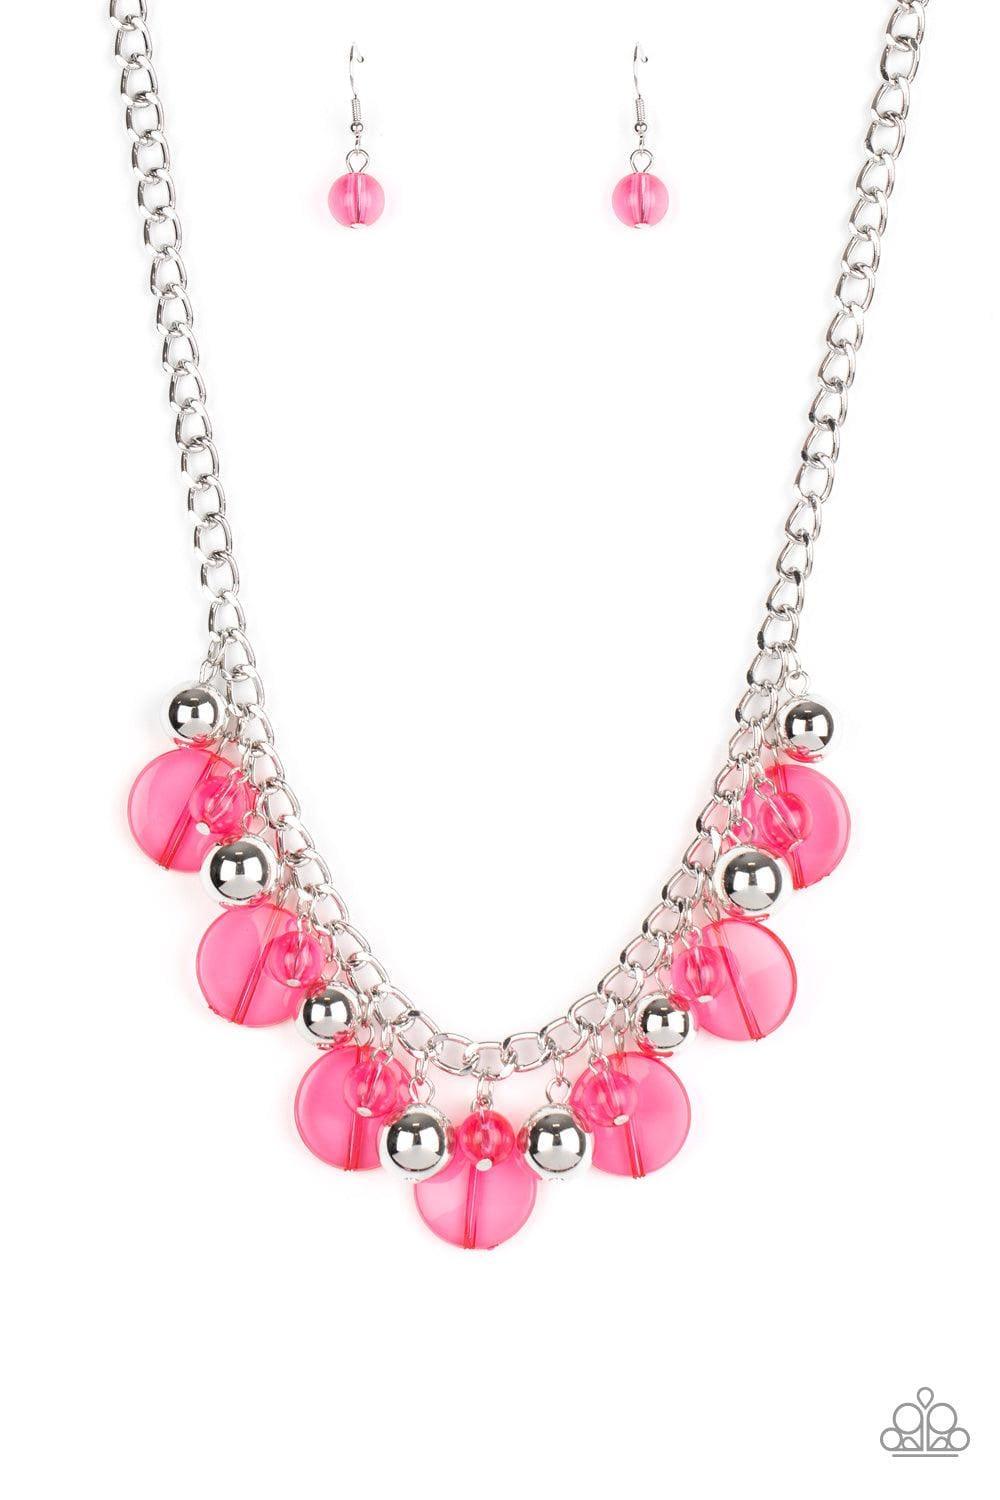 Paparazzi Accessories - Gossip Glam - Pink Necklace - Bling by JessieK